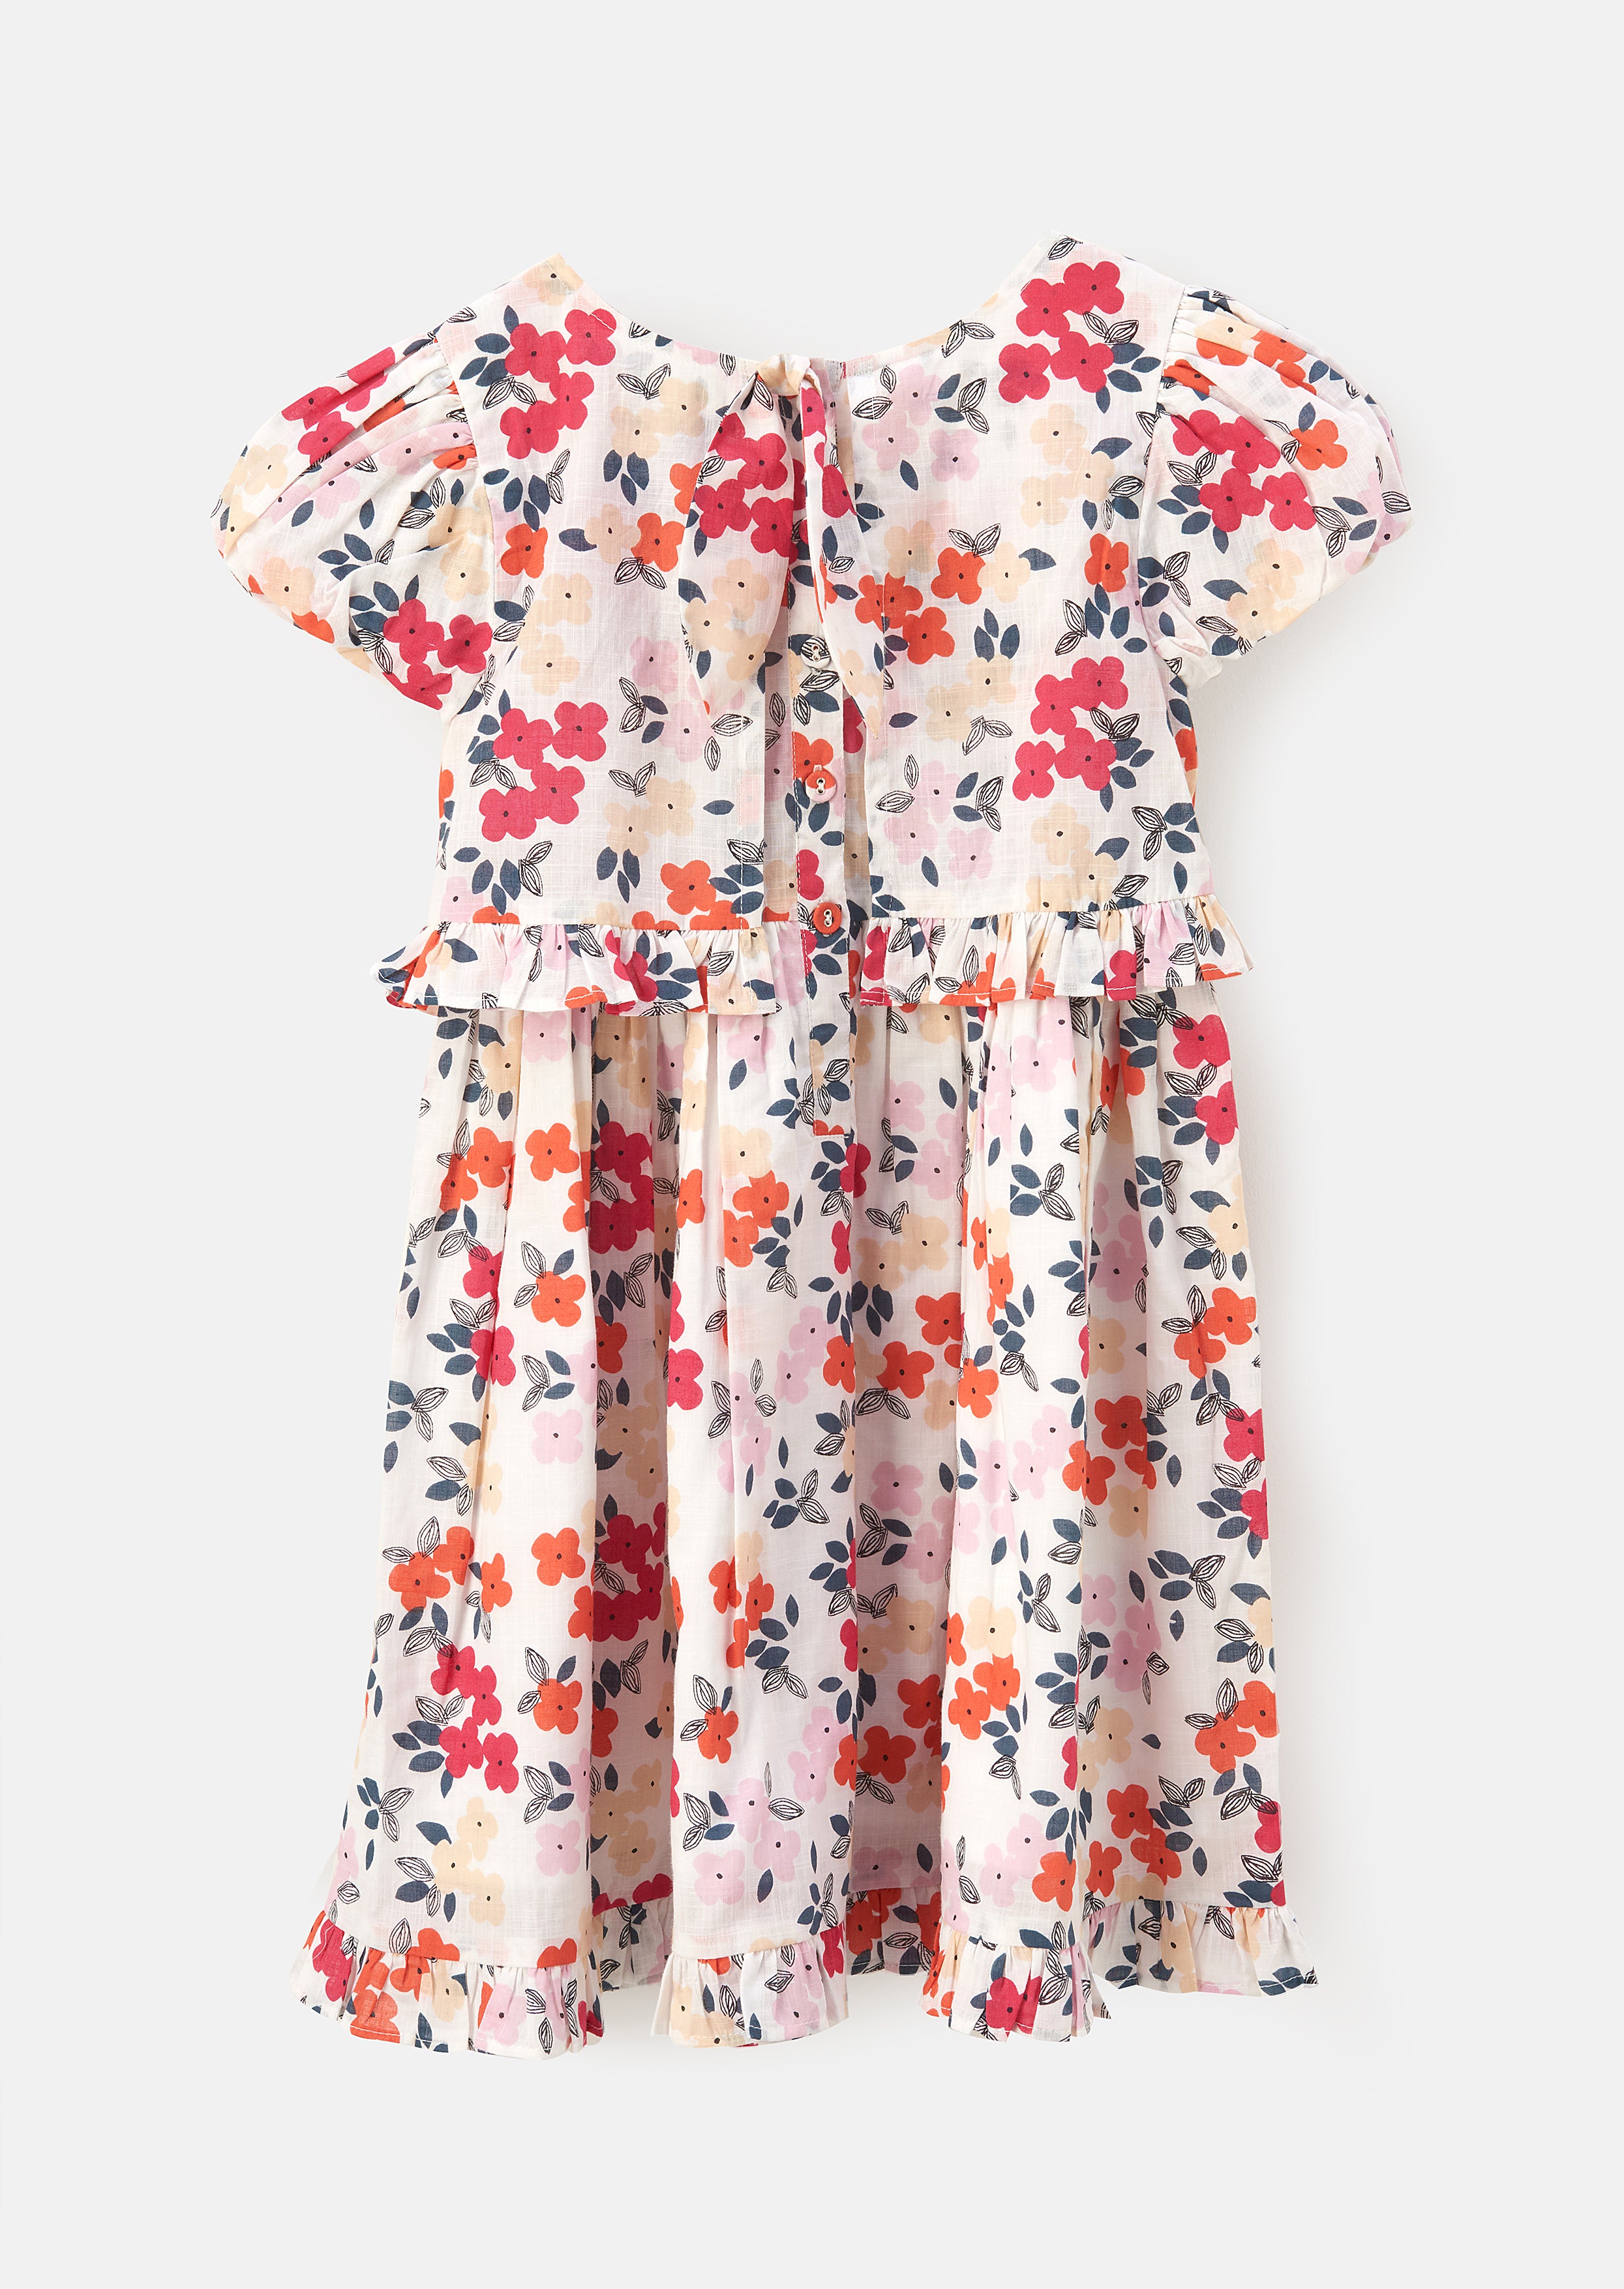 Girls Floral Printed Woven Dress